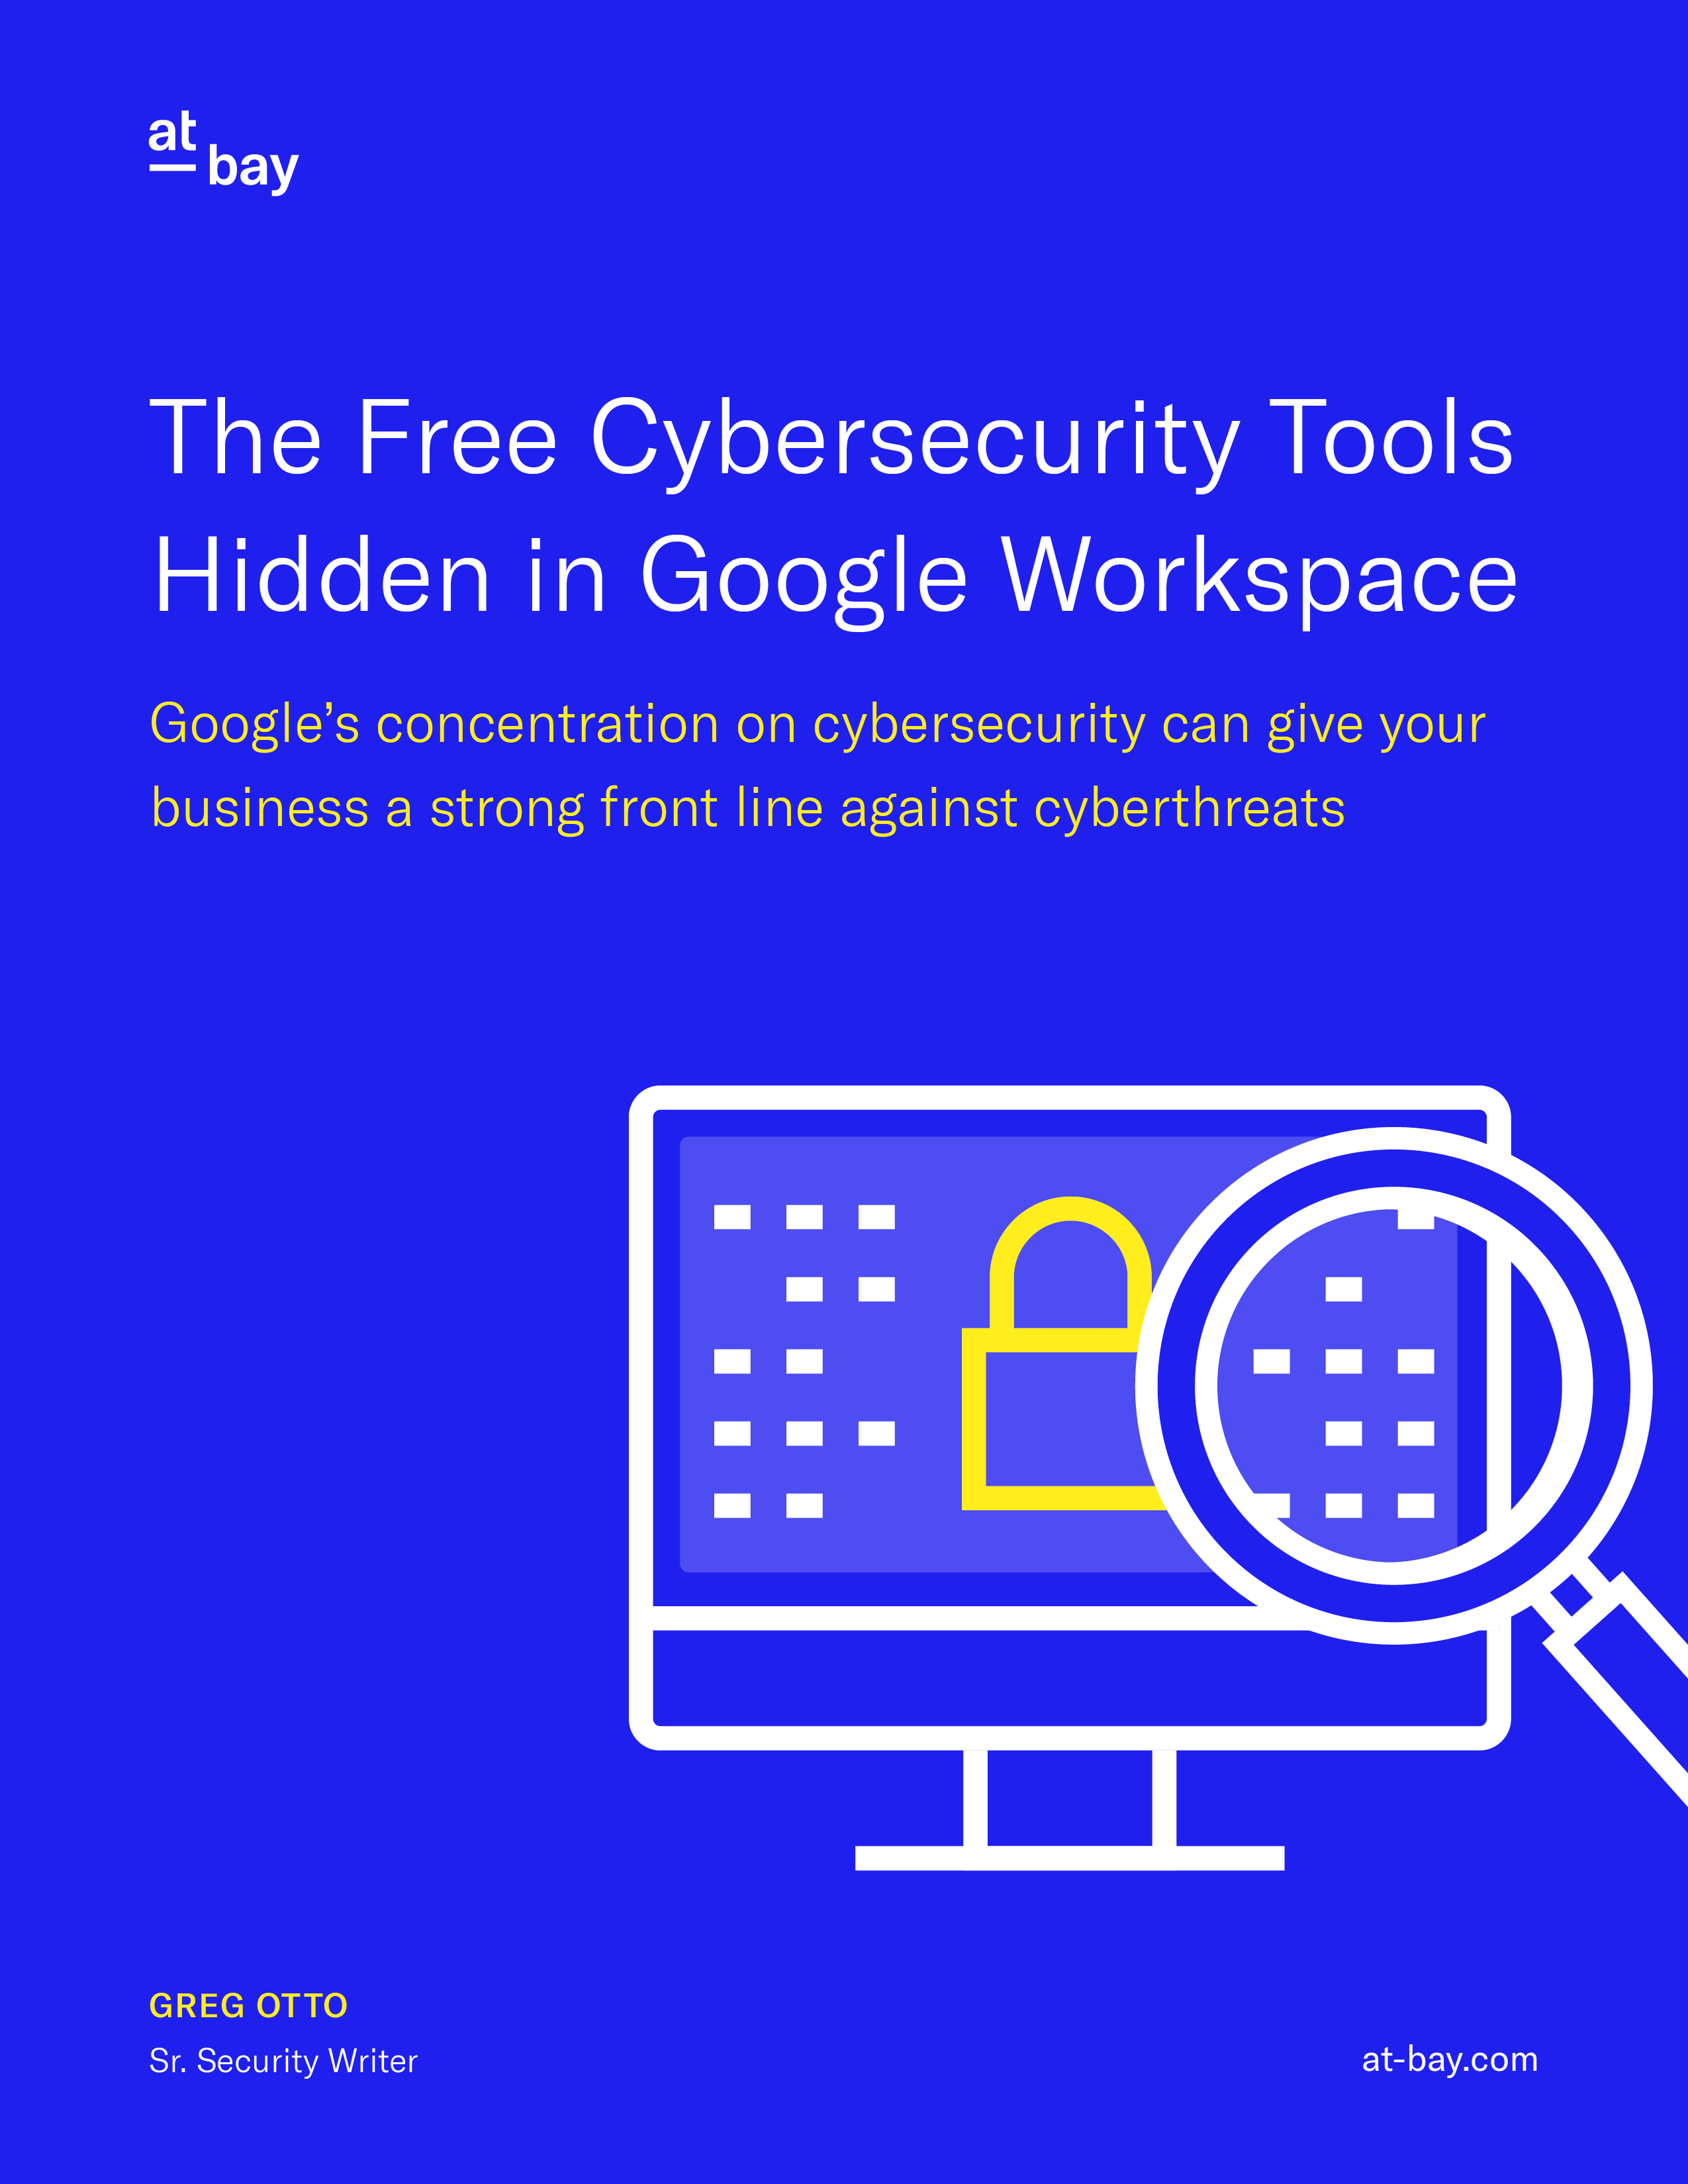 The Free Cybersecurity Tools Hidden in Google Workspace